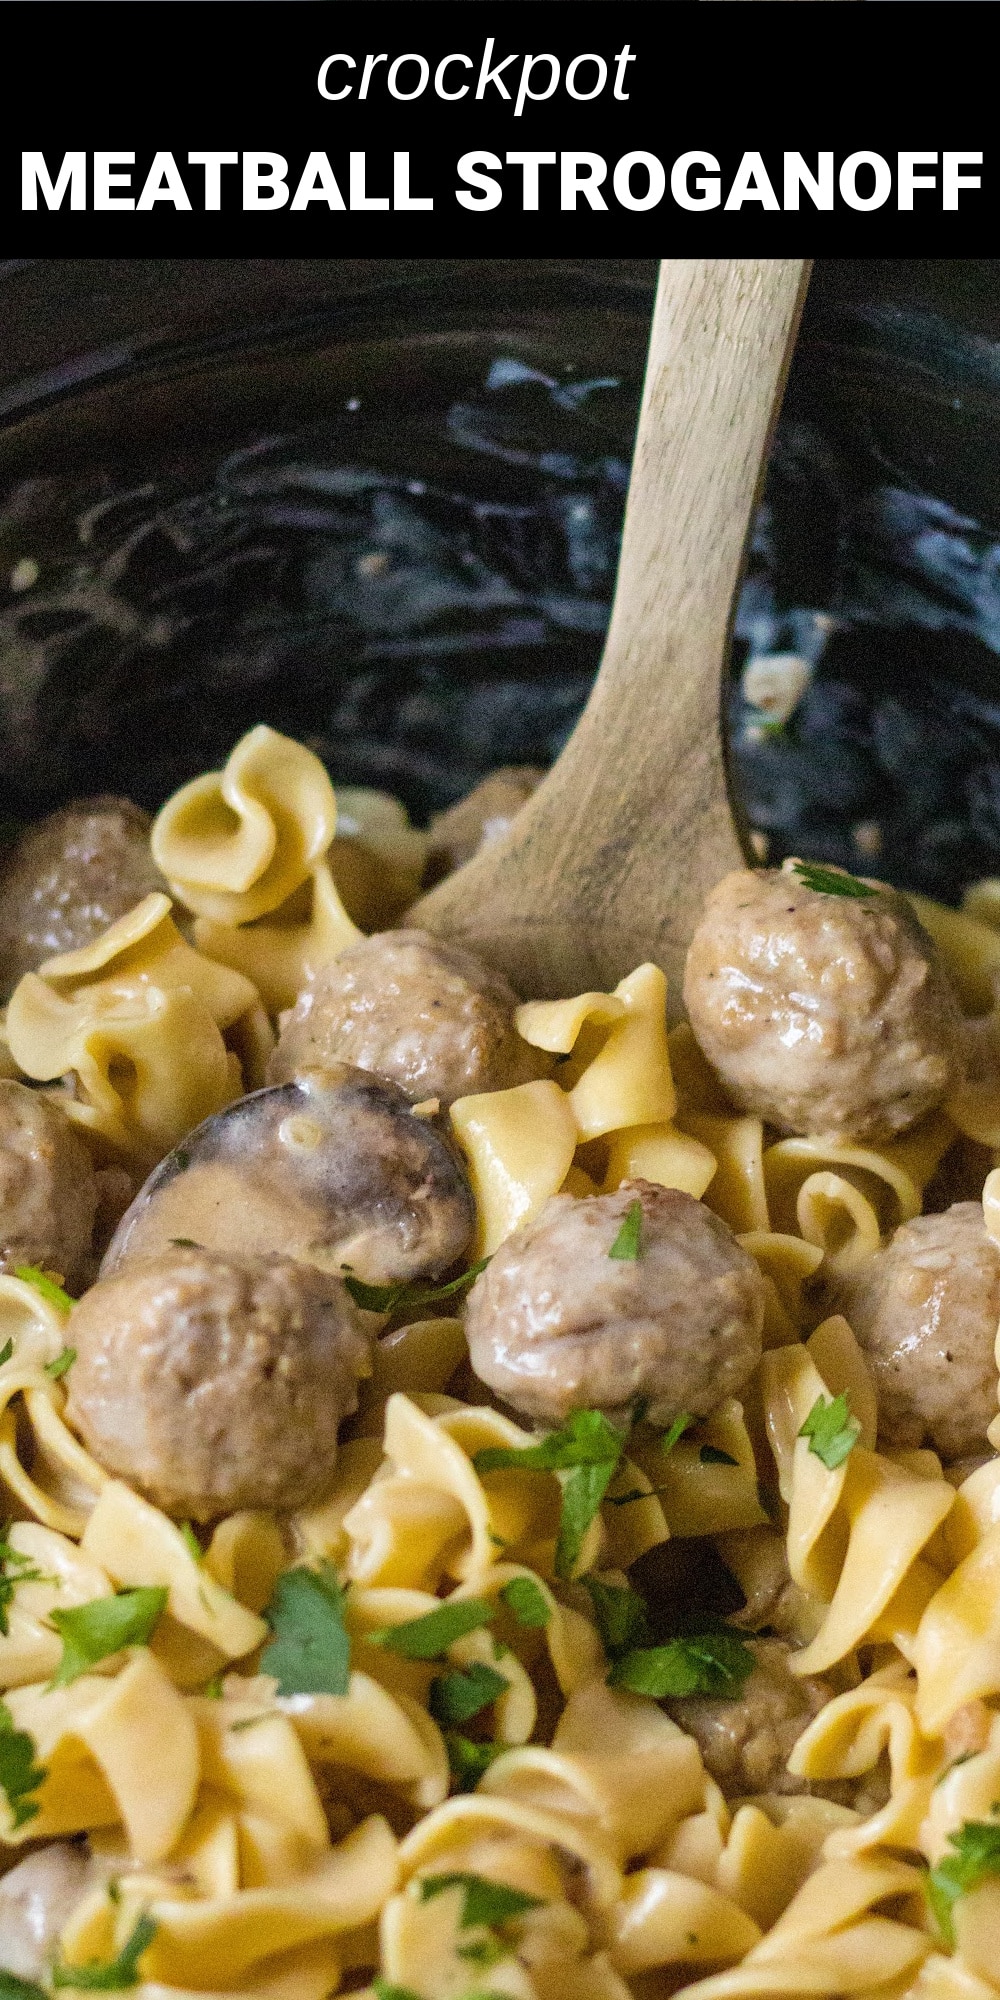 This Crockpot Meatball Stroganoff is made with savory meatballs and tender sliced mushrooms cooked in a rich sour cream sauce and served over pasta noodles.